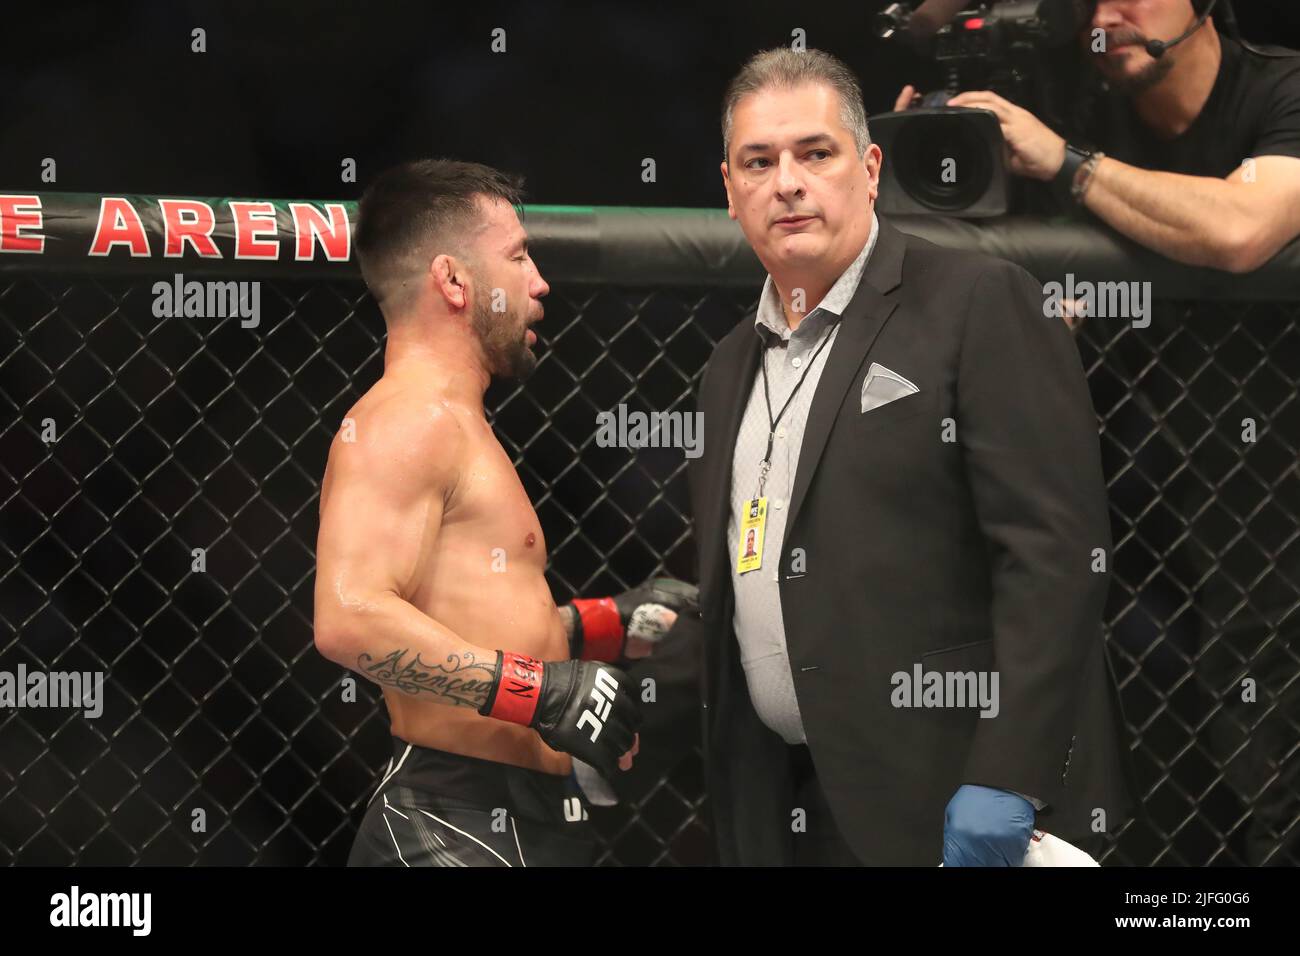 Las Vegas, United States. 02nd July, 2022. LAS VEGAS, NV - JULY 2: Pedro Munhoz reacts after an inadvertent eye poke from O'Malley in their Bantamweight bout during the UFC 276 event at the T-Mobile Arena on July 2, 2022 in Las Vegas, Nevada, United States. (Photo by Alejandro Salazar/PxImages) Credit: Px Images/Alamy Live News Stock Photo